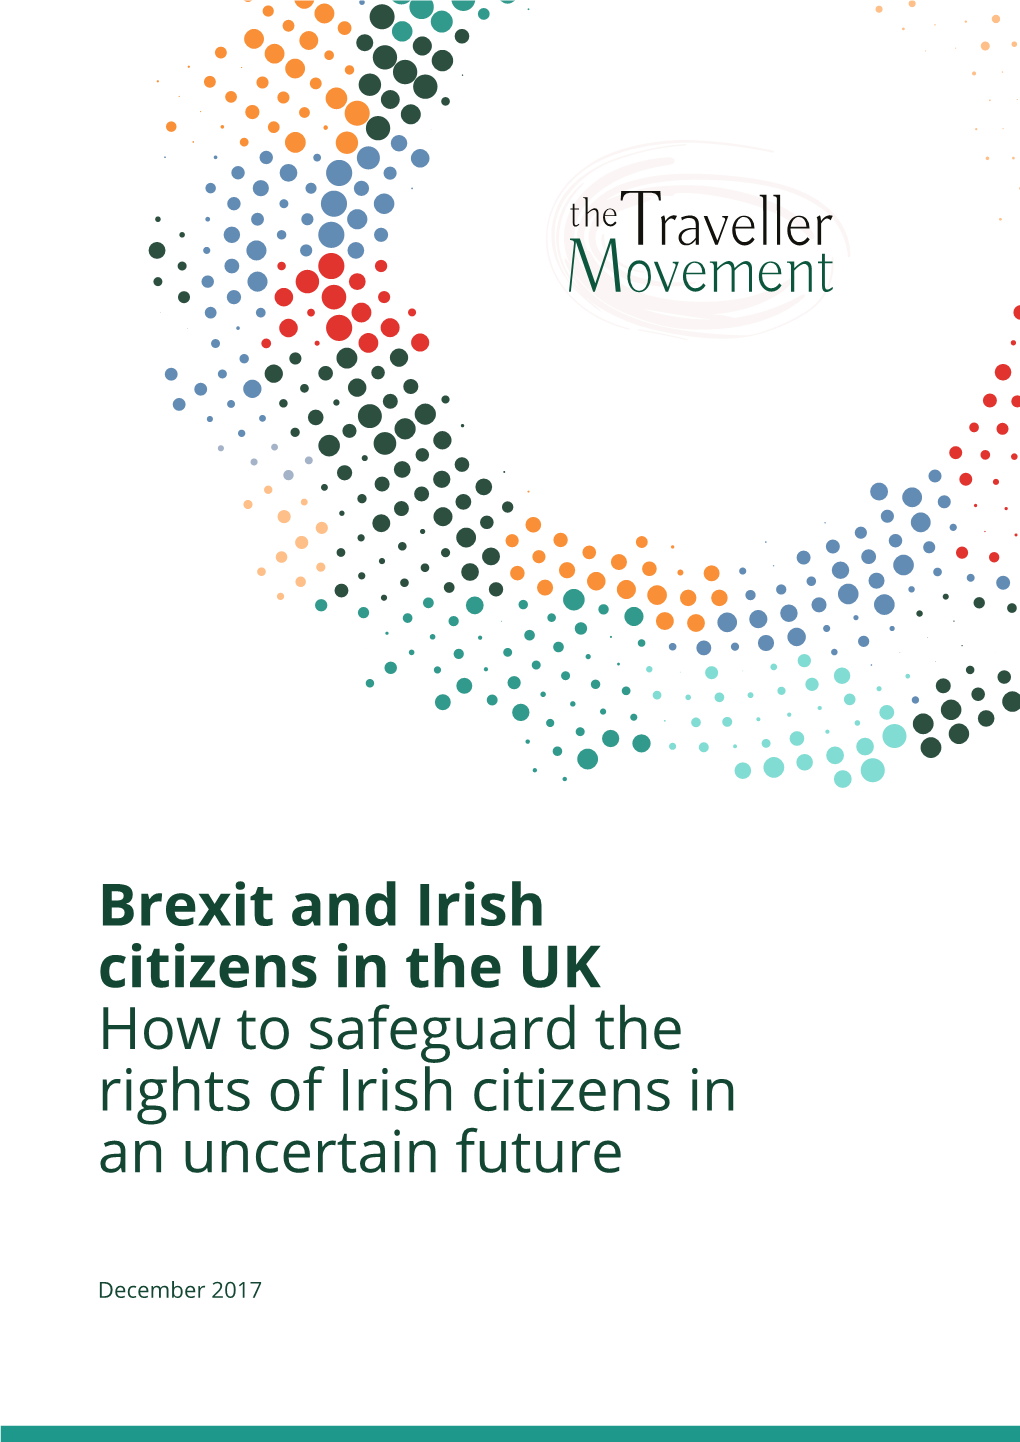 Brexit and Irish Citizens in the UK How to Safeguard the Rights of Irish Citizens in an Uncertain Future